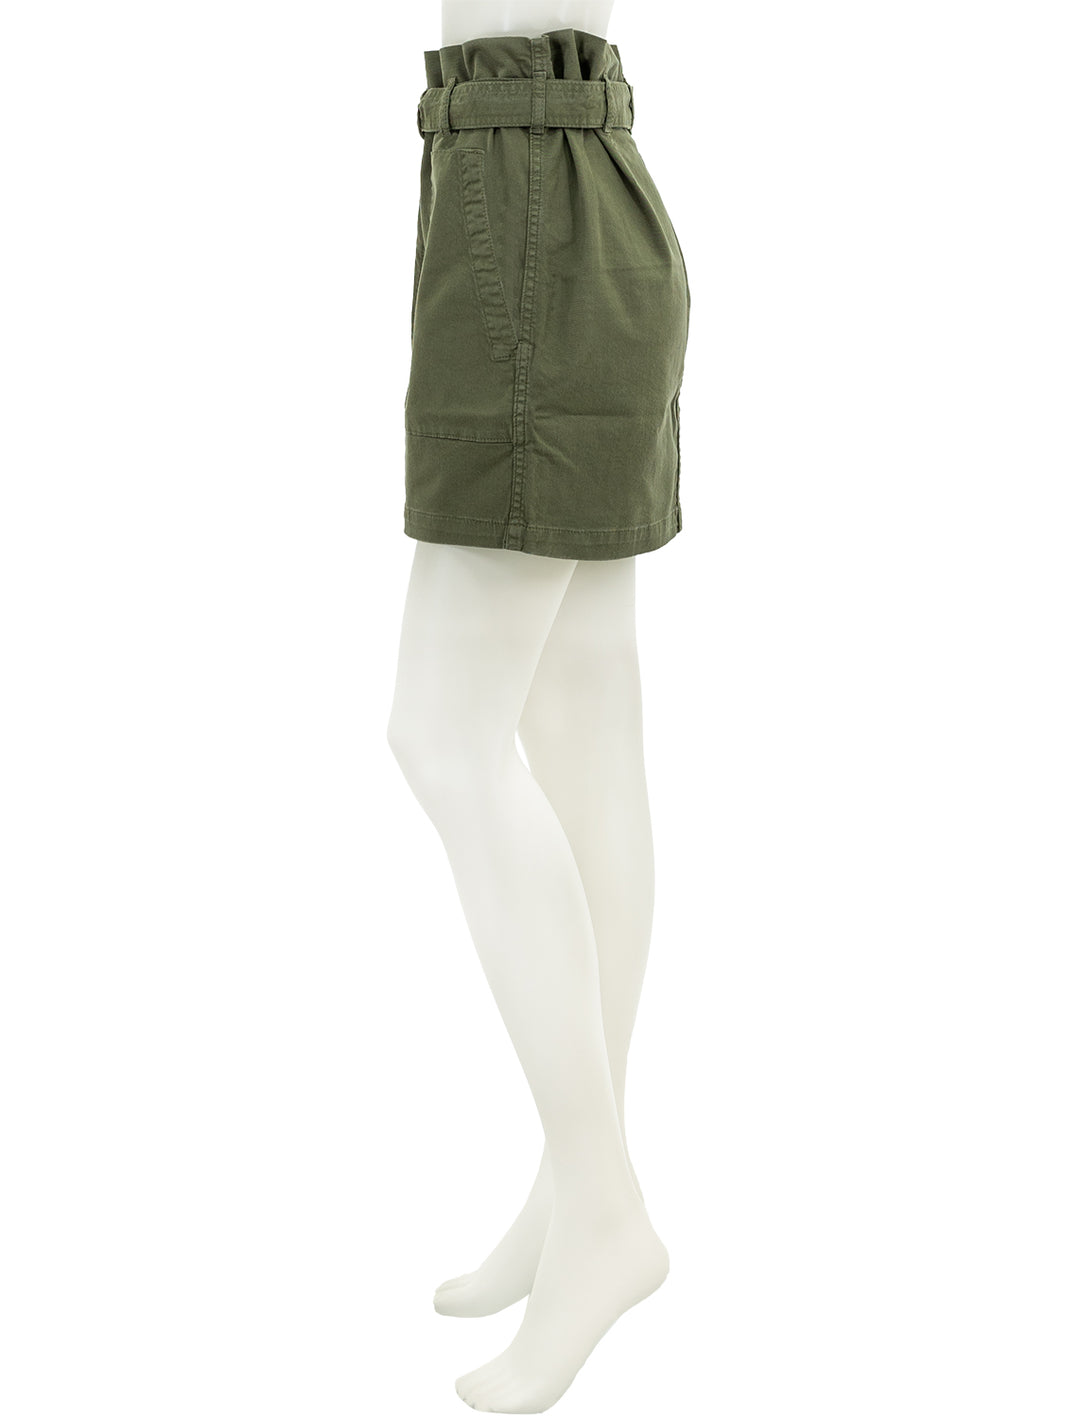 Side view of Anine Bing's aveline skirt in army green.